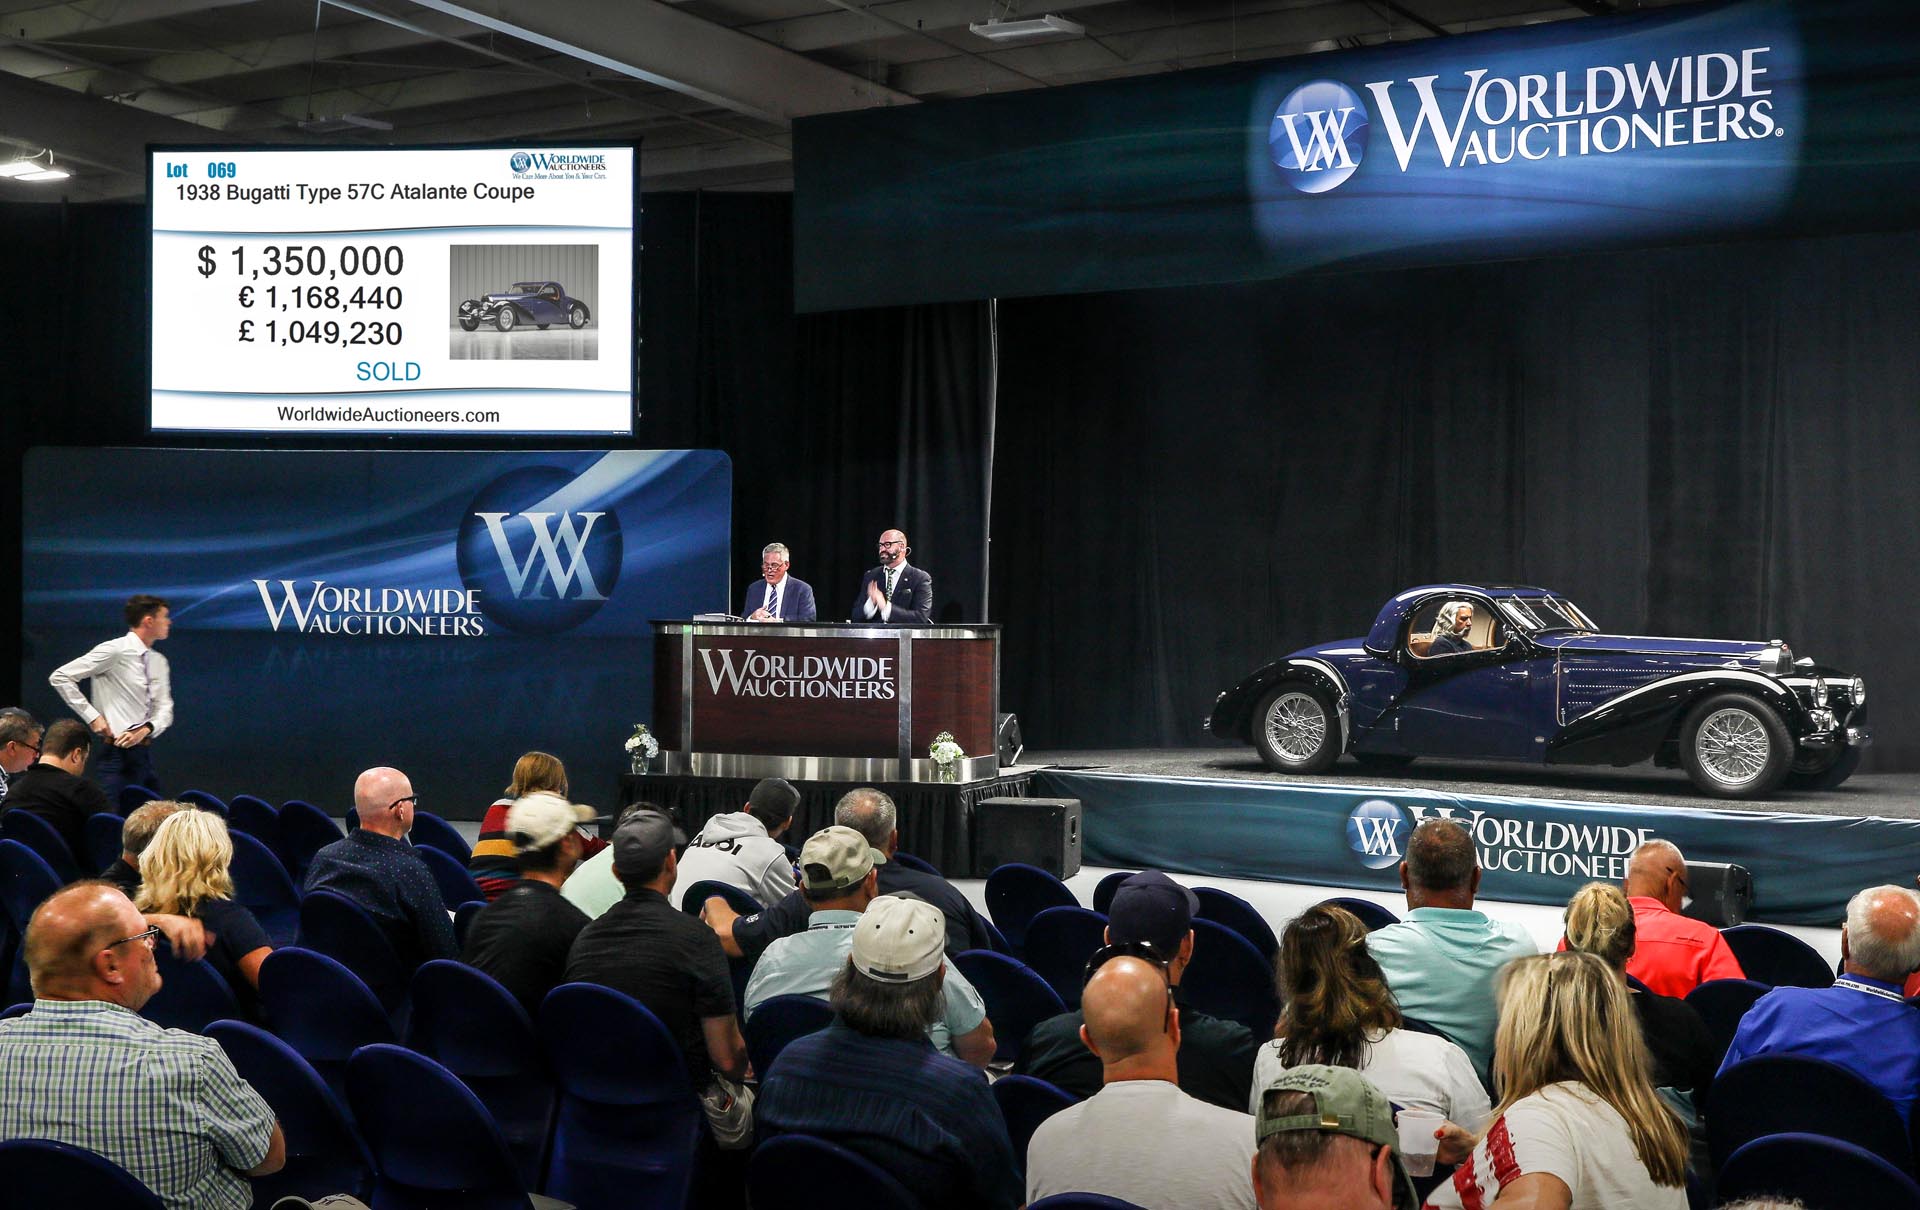 Worldwide Auctioneers announces a massive expansion of its annual Auburn Auction at home in Indiana